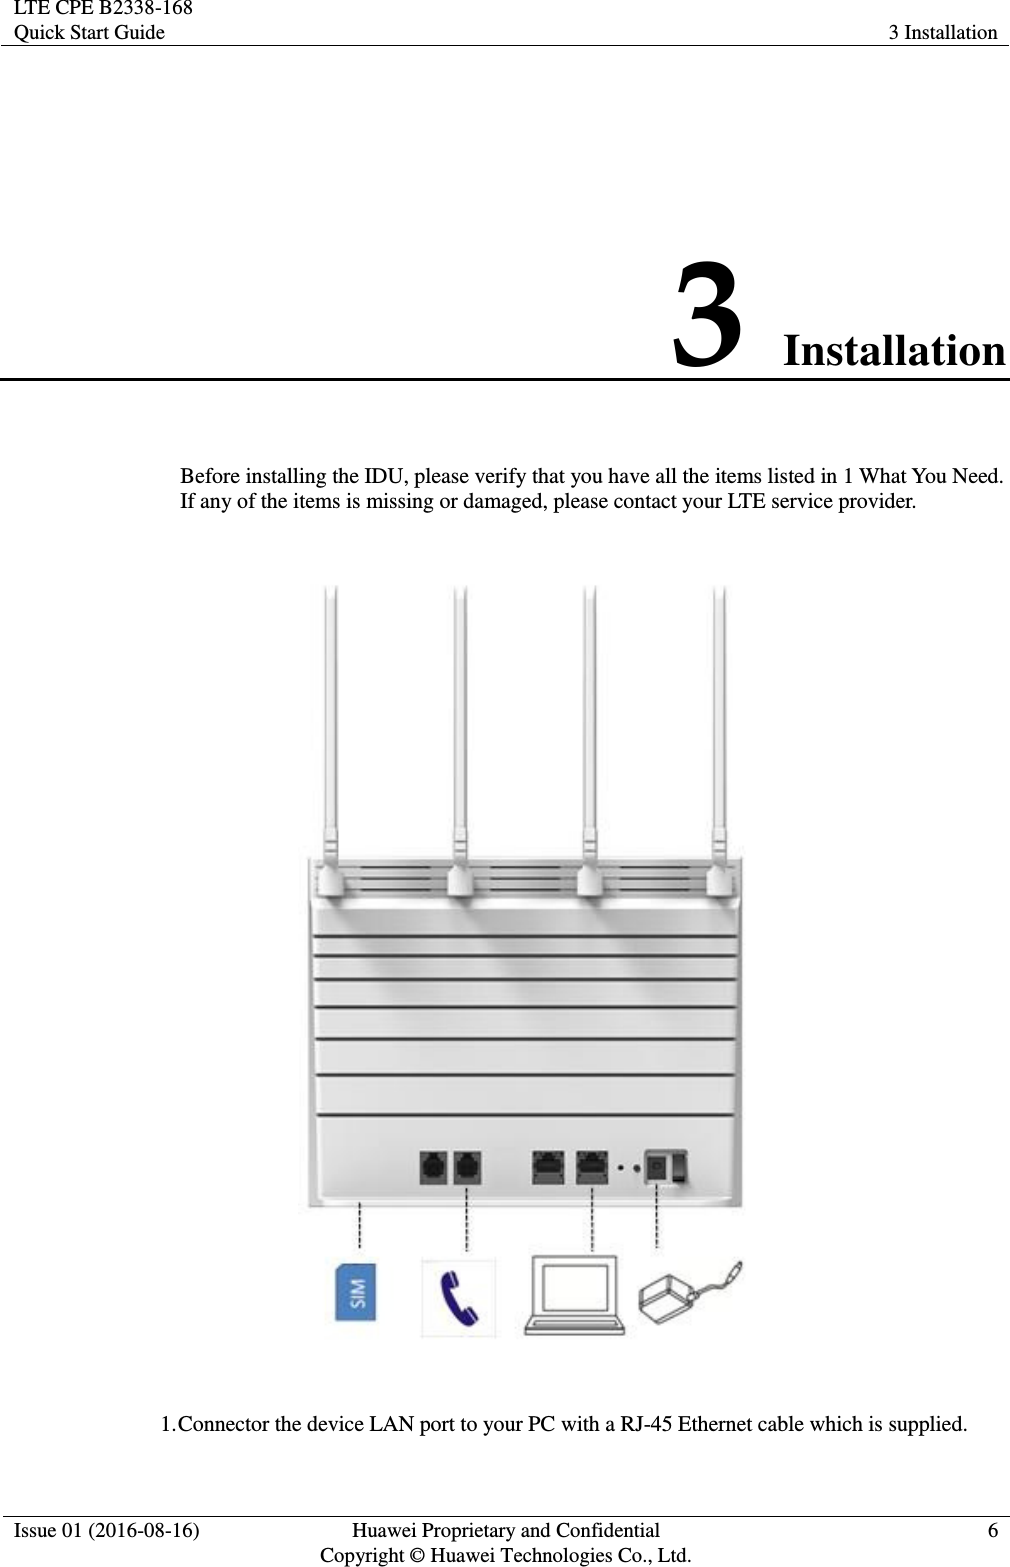 LTE CPE B2338-168 Quick Start Guide 3 Installation  Issue 01 (2016-08-16) Huawei Proprietary and Confidential         Copyright © Huawei Technologies Co., Ltd. 6  3 Installation Before installing the IDU, please verify that you have all the items listed in 1 What You Need. If any of the items is missing or damaged, please contact your LTE service provider.    1. Connector the device LAN port to your PC with a RJ-45 Ethernet cable which is supplied. 